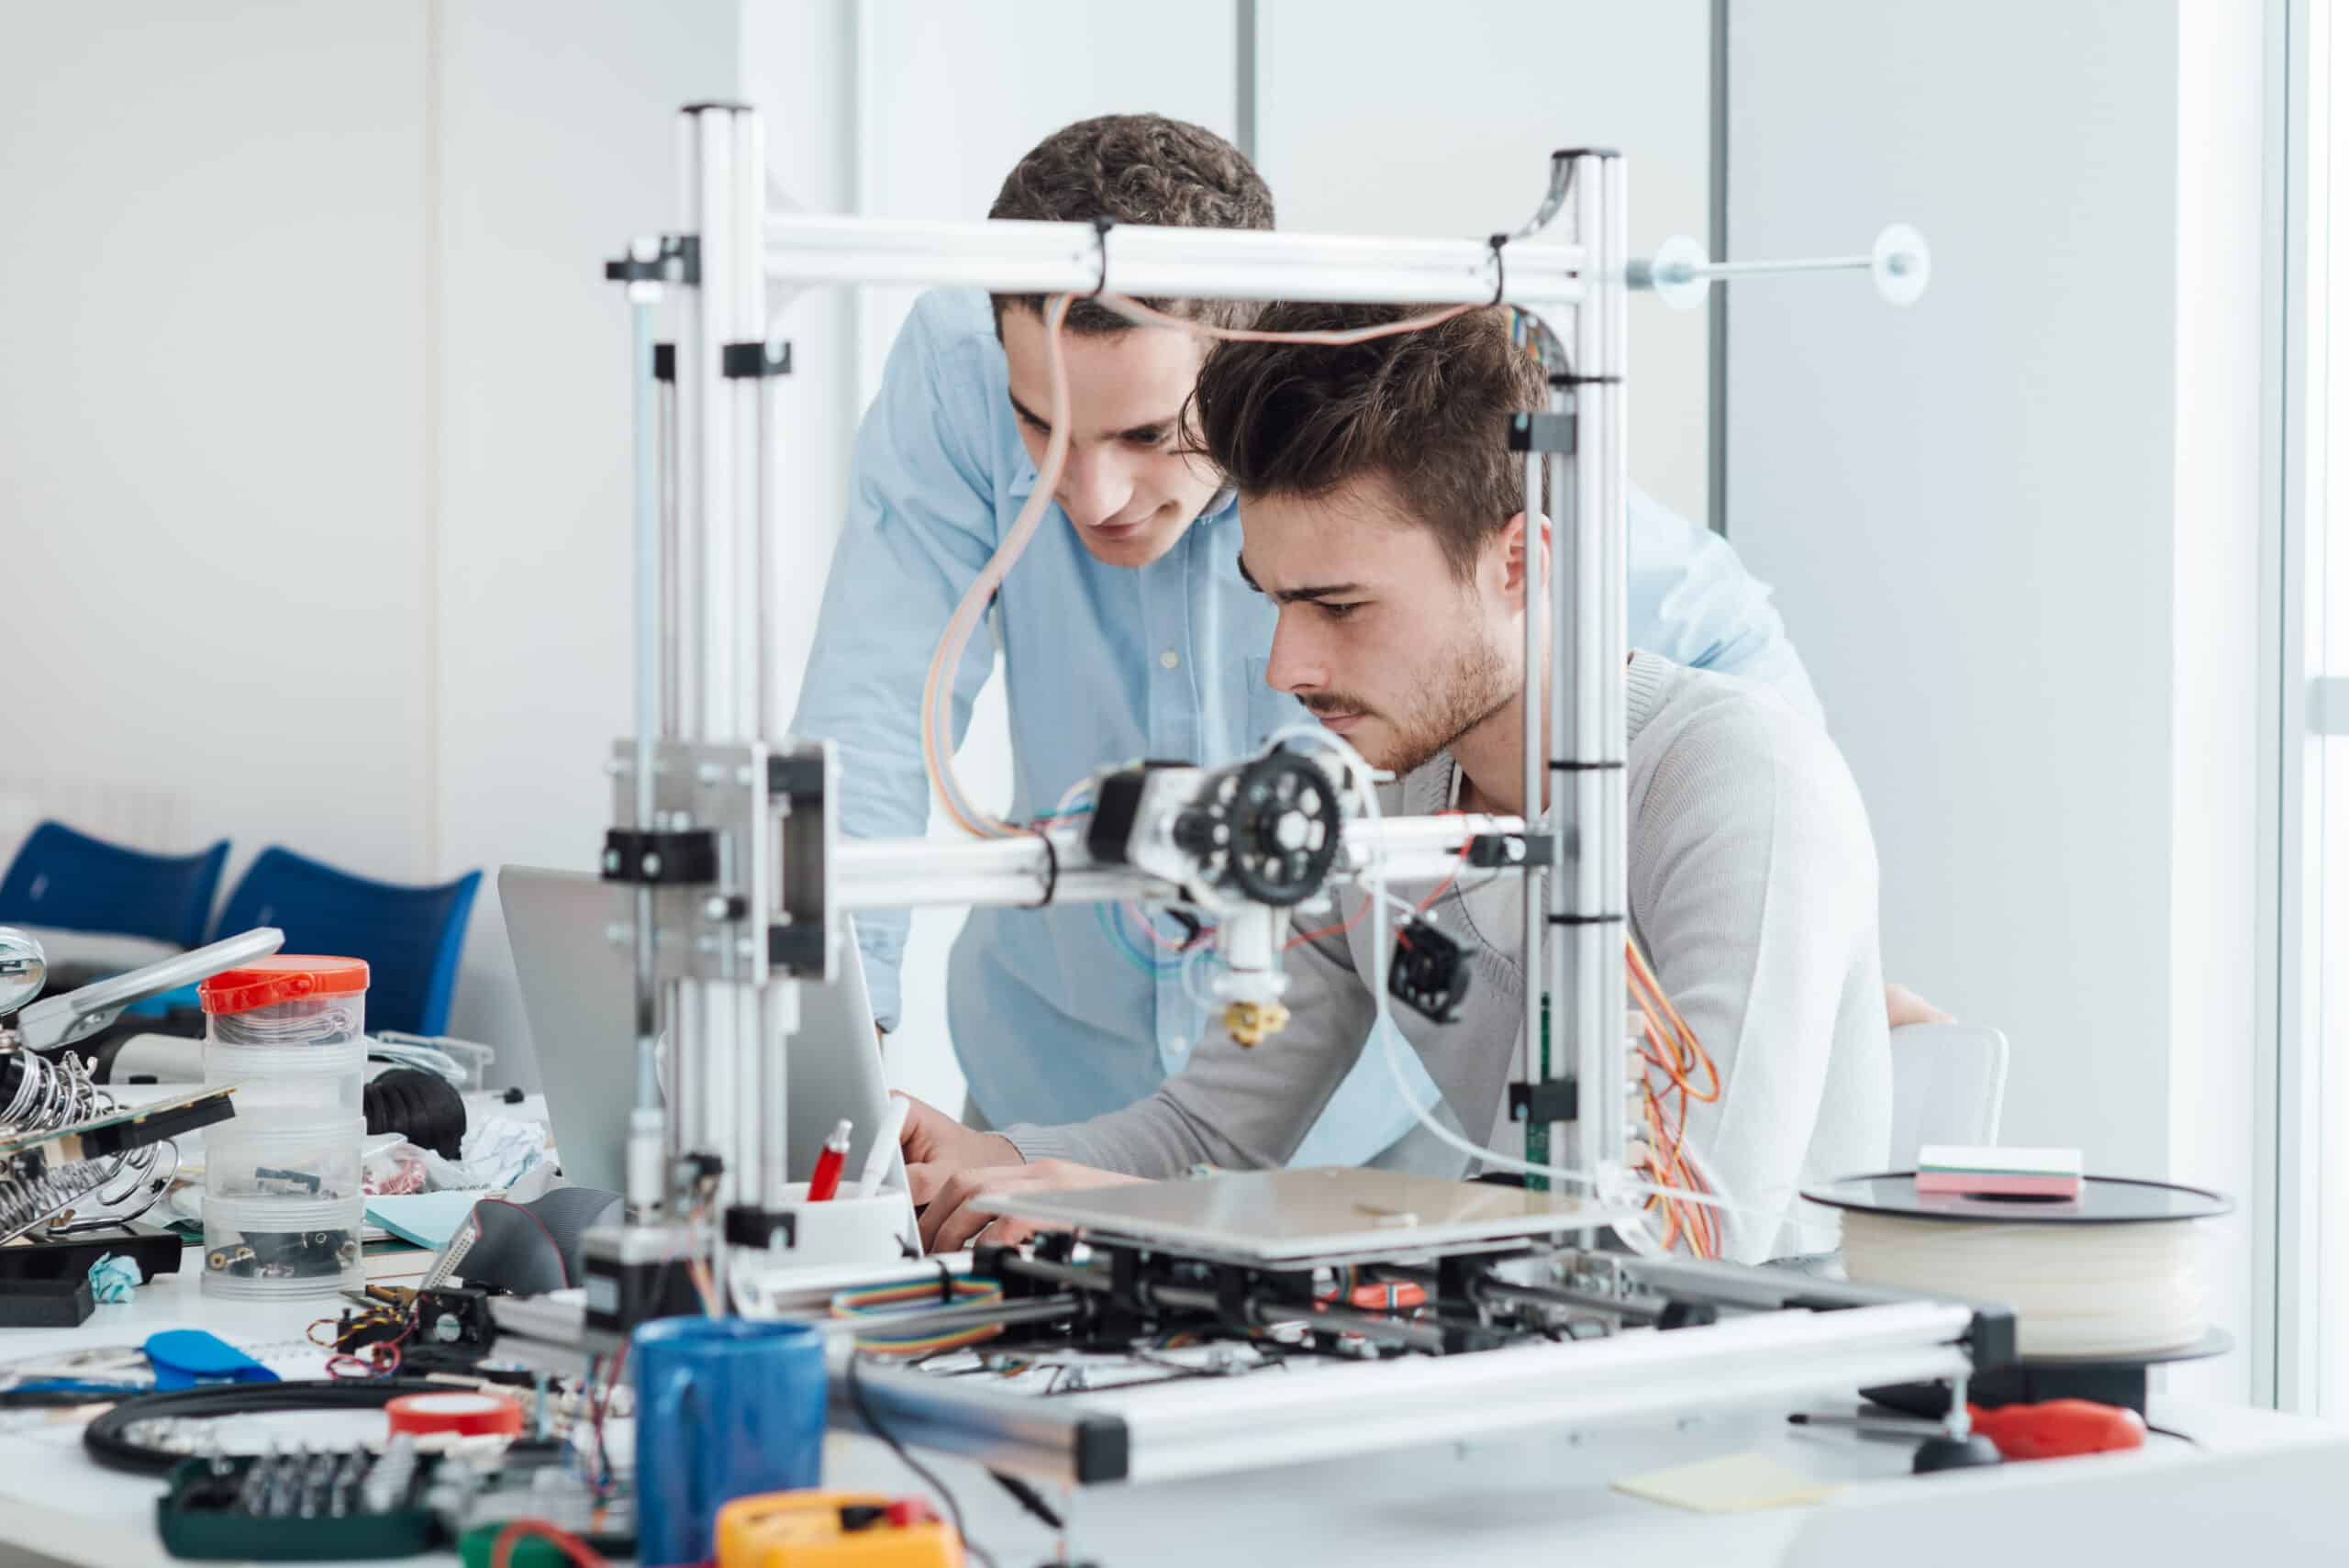 research and development jobs in mechanical engineering